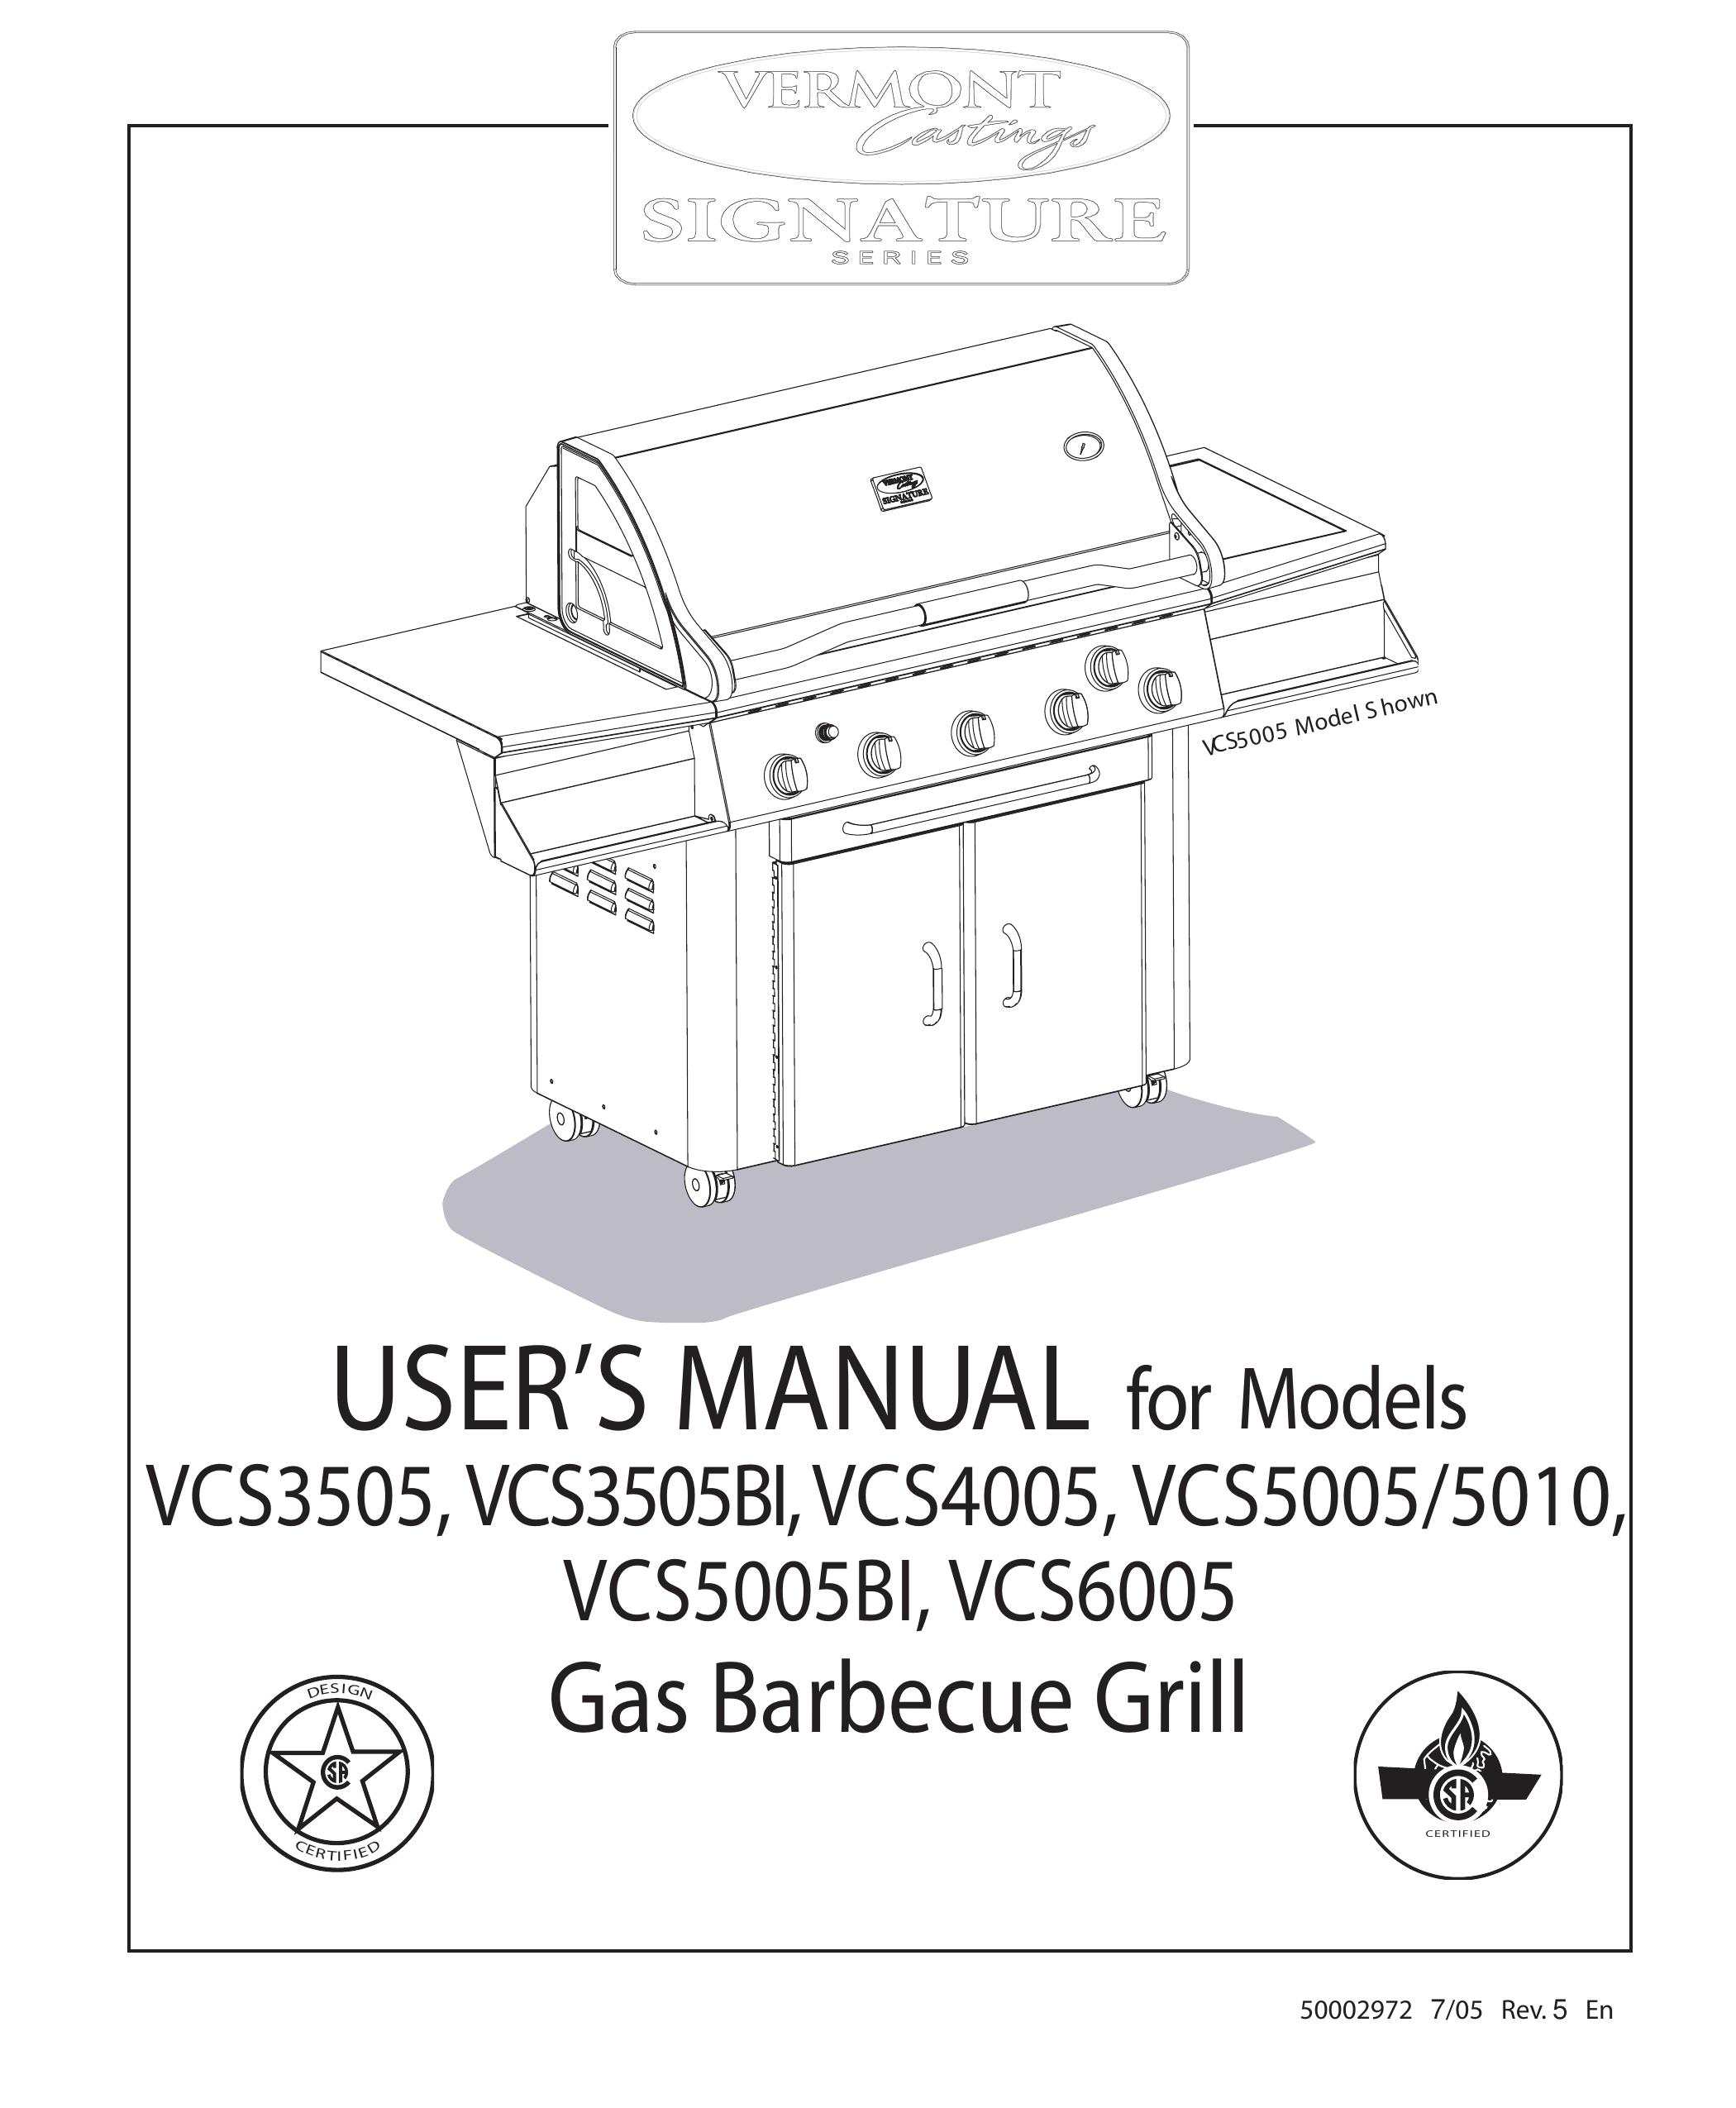 Vermont Casting VCS5005/5010 Gas Grill User Manual